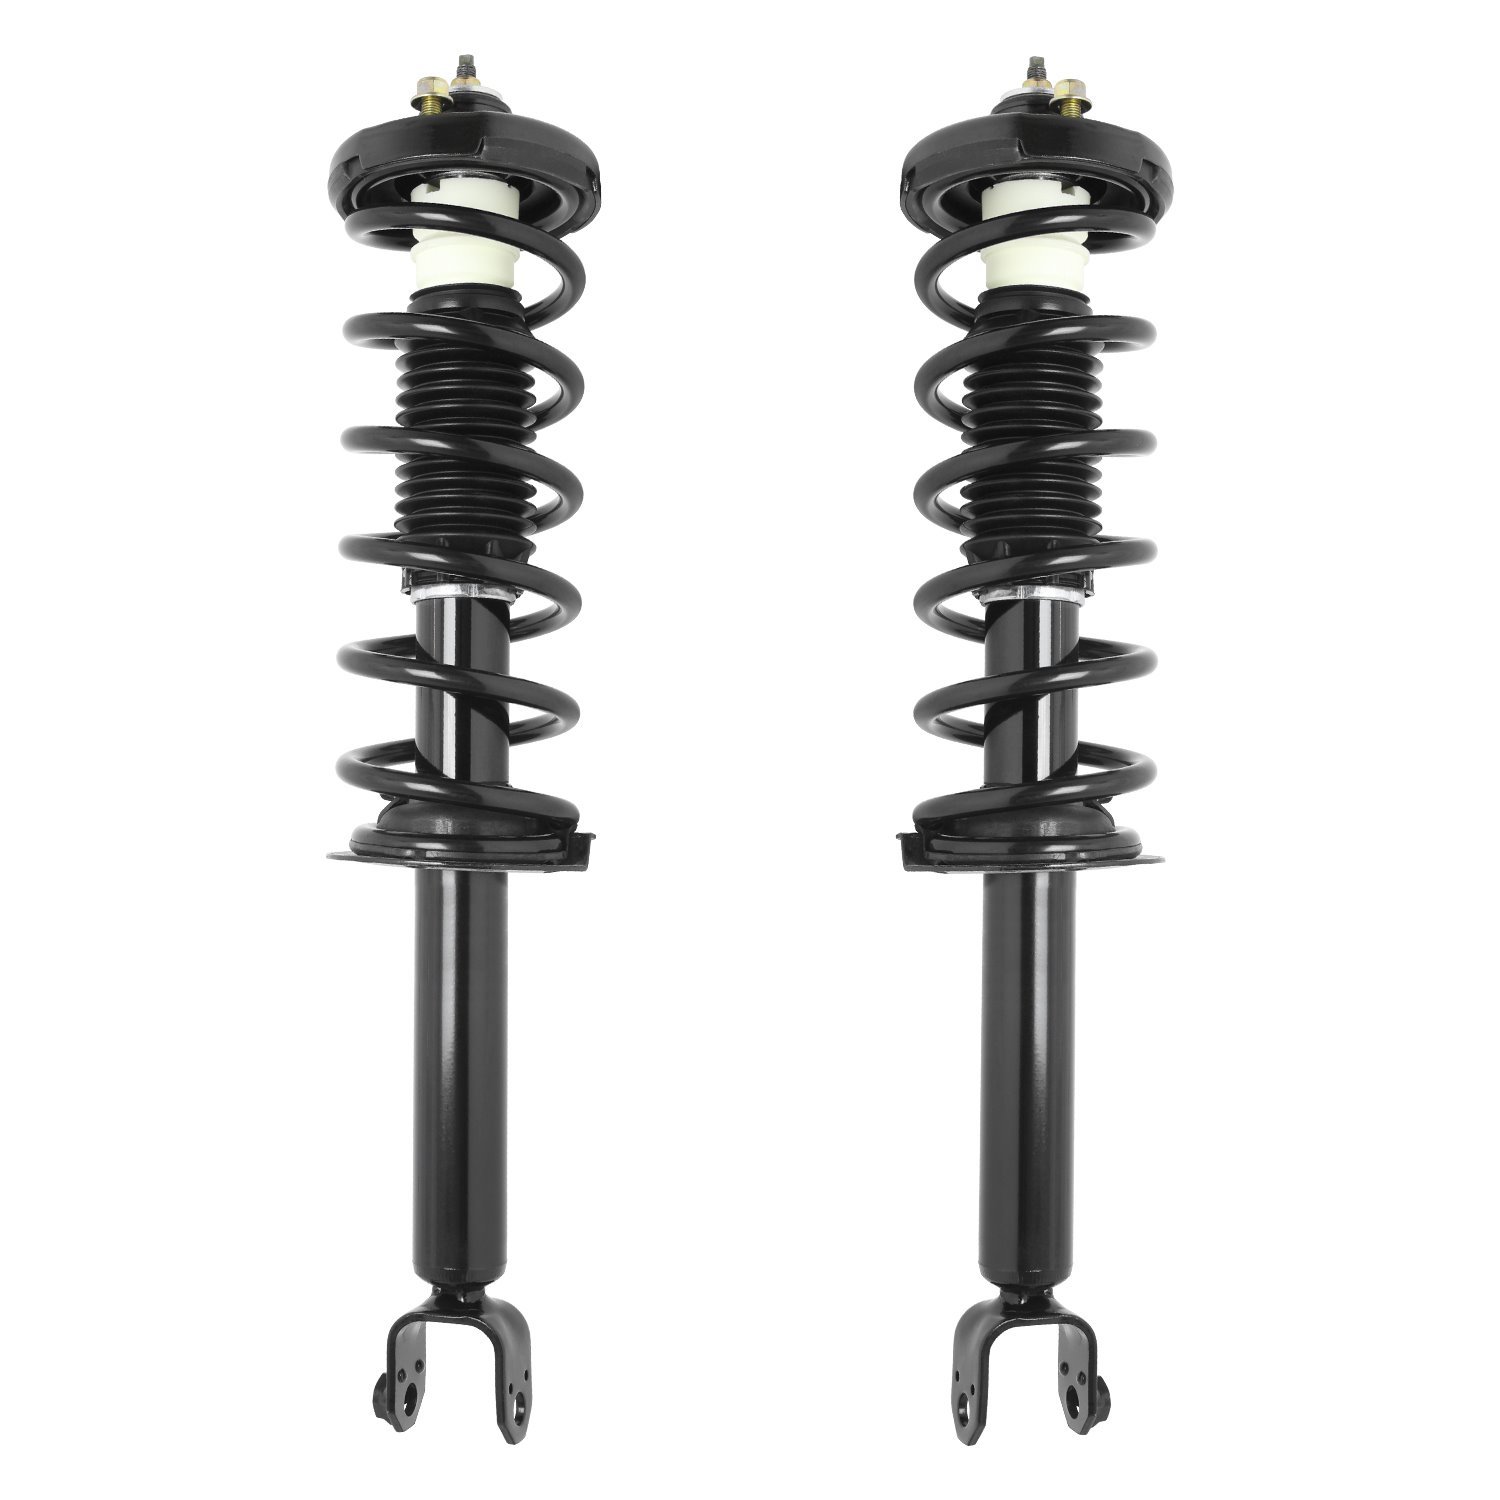 2-15011-15012-001 Suspension Strut & Coil Spring Assembly Set Fits Select Acura TSX, Acura TL